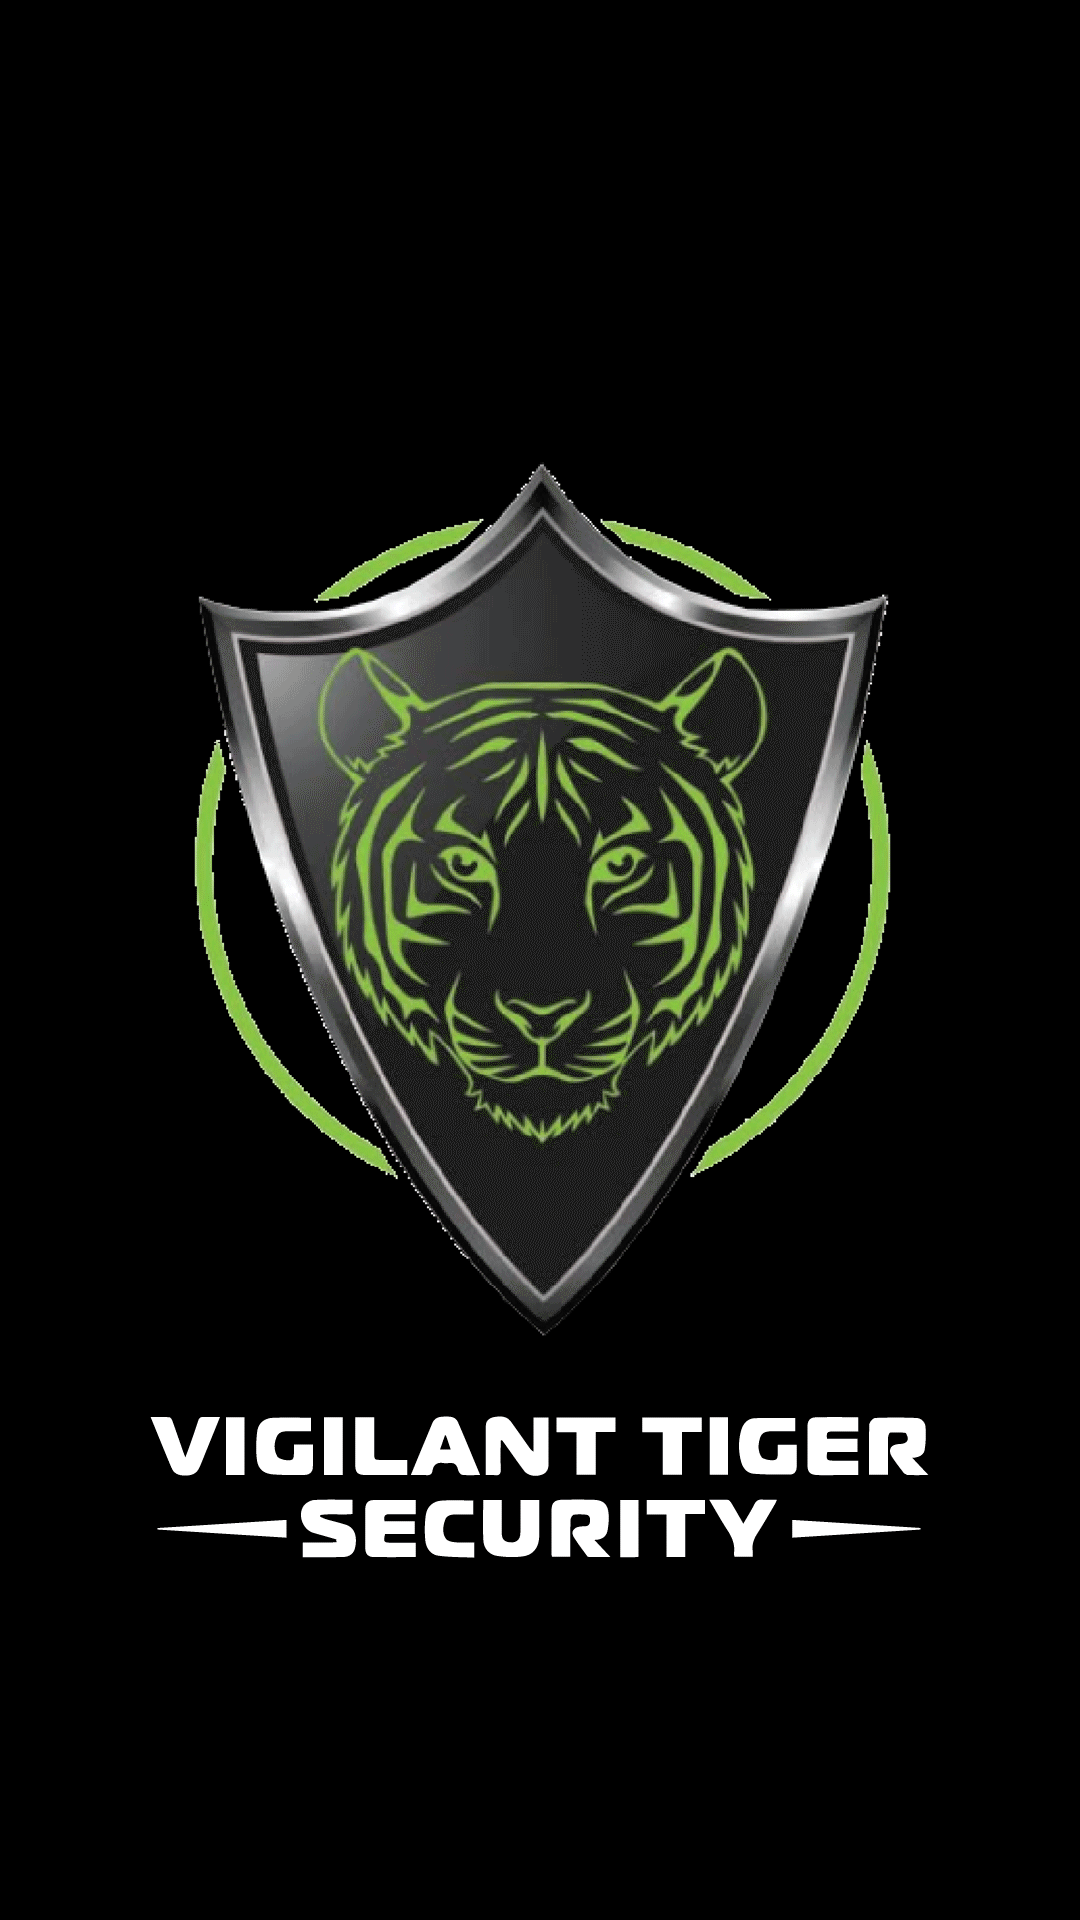 Gif on Vigilant Tiger Security Donating 15% to movement stories